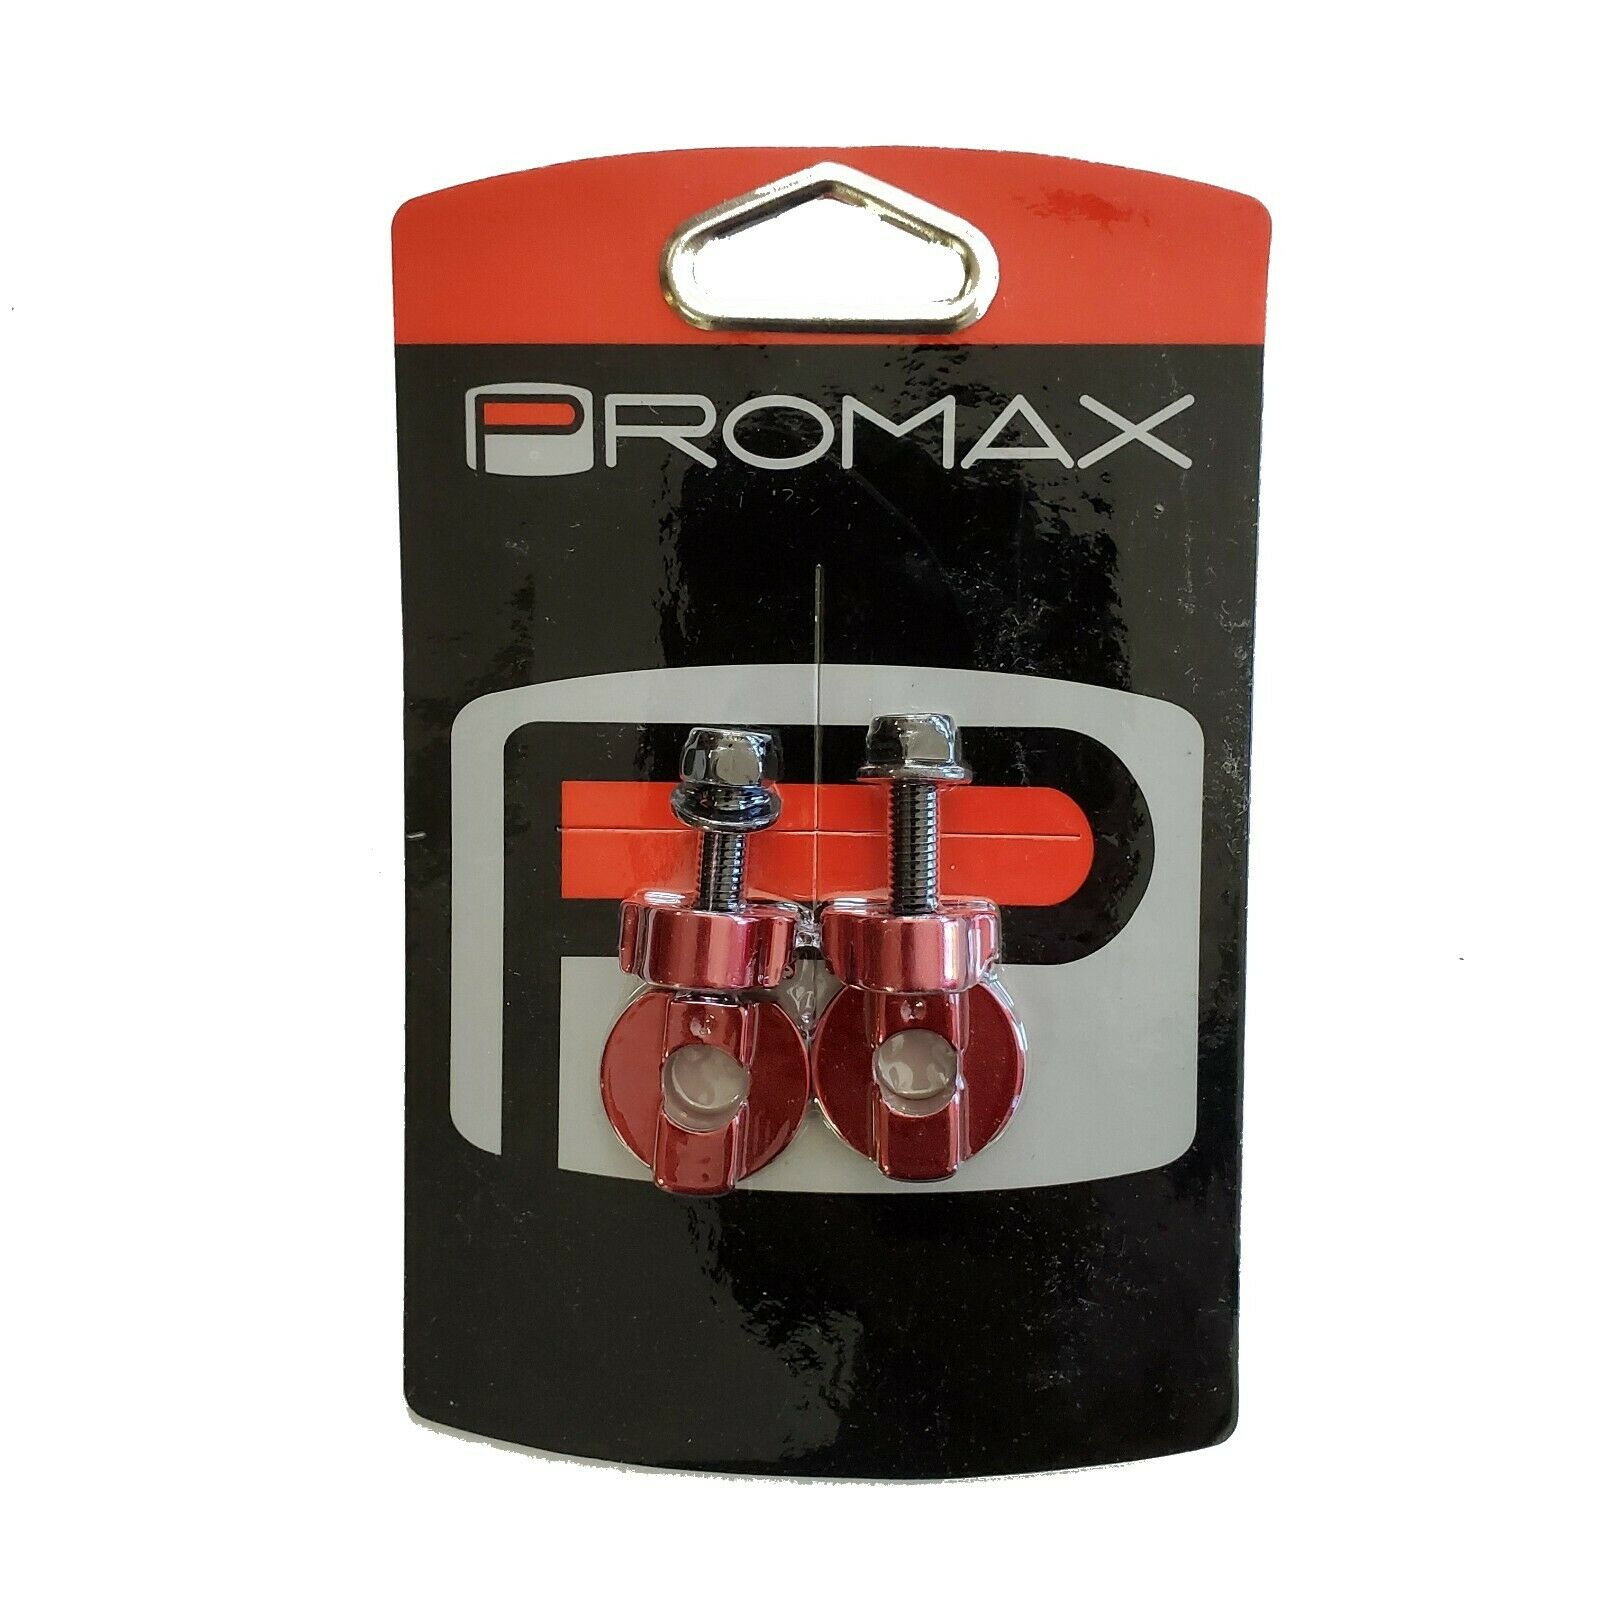 Promax C-2 BMX Chain Tensioners - 3/8" - Pair - Red